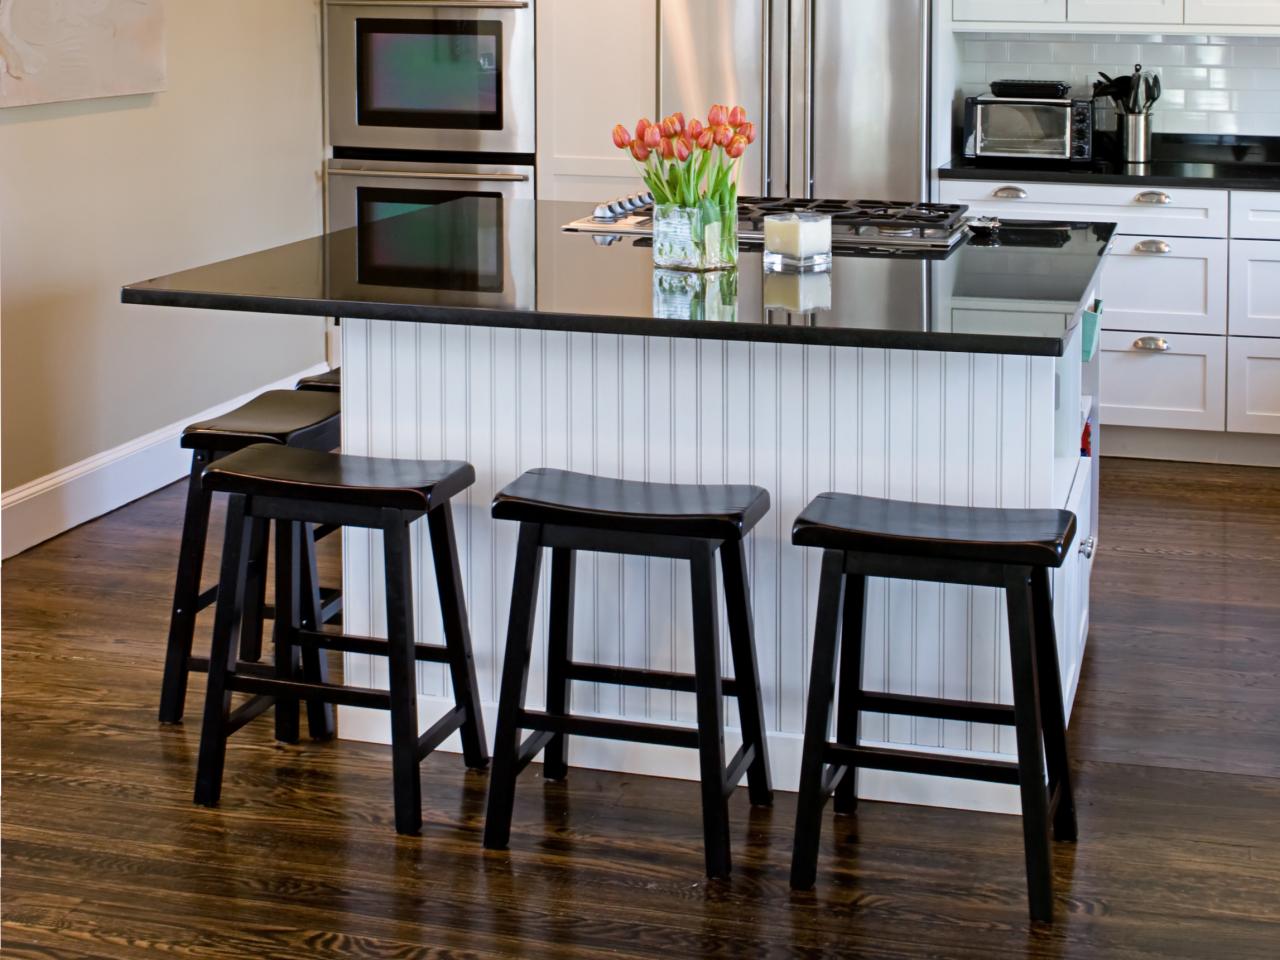 Kitchen Islands With Breakfast Bars, Kitchen Island With Bar Stool Seating